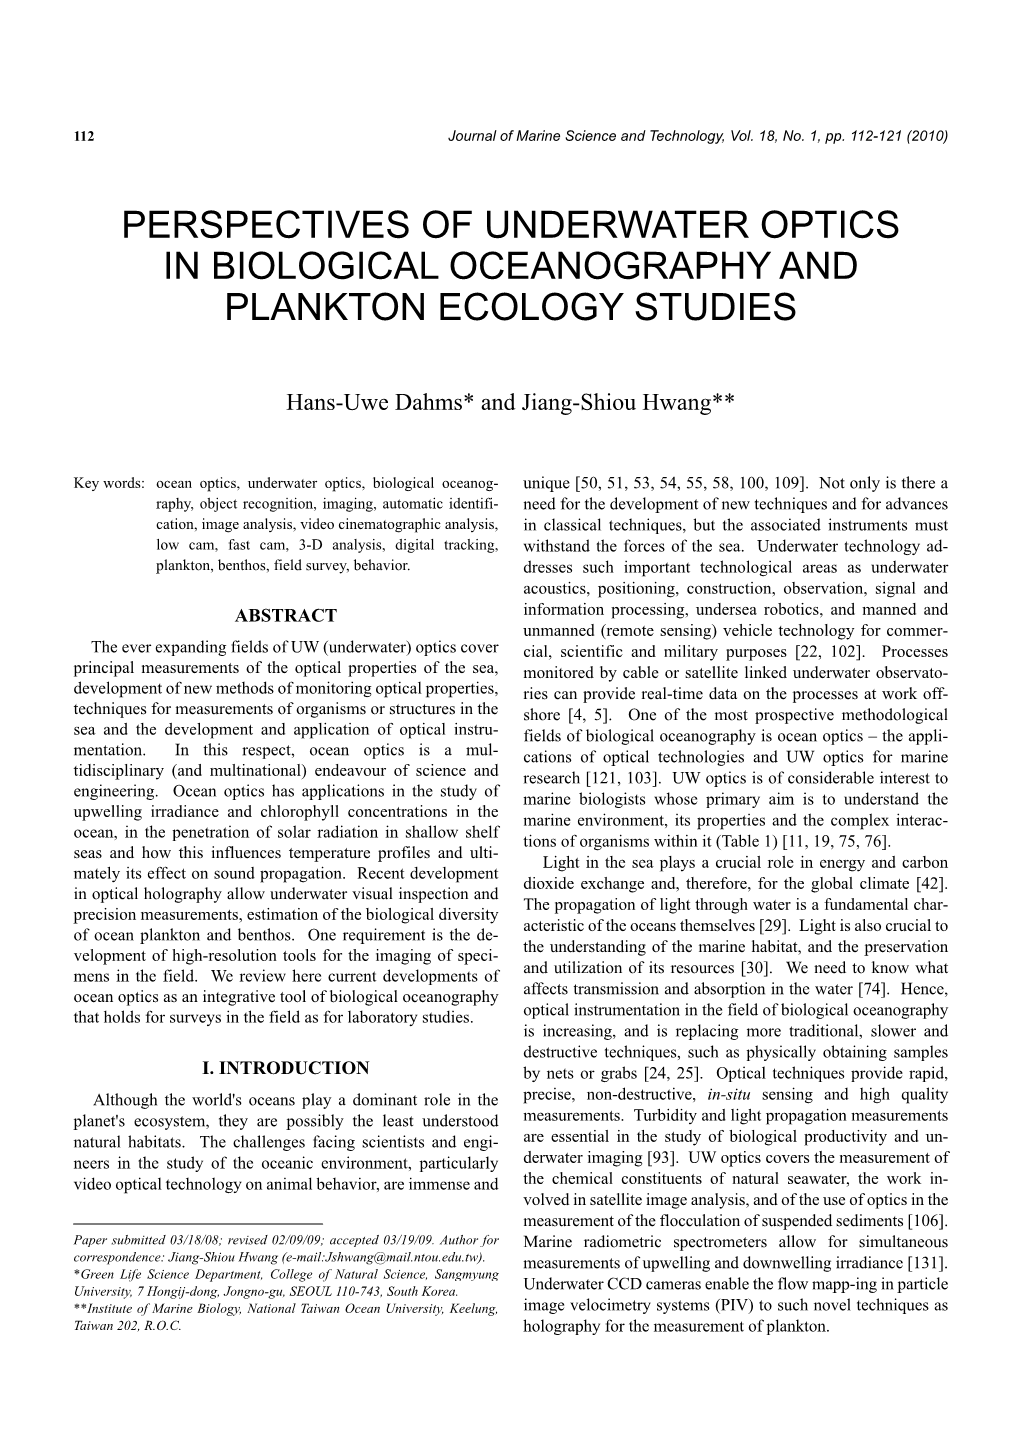 Perspectives of Underwater Optics in Biological Oceanography and Plankton Ecology Studies